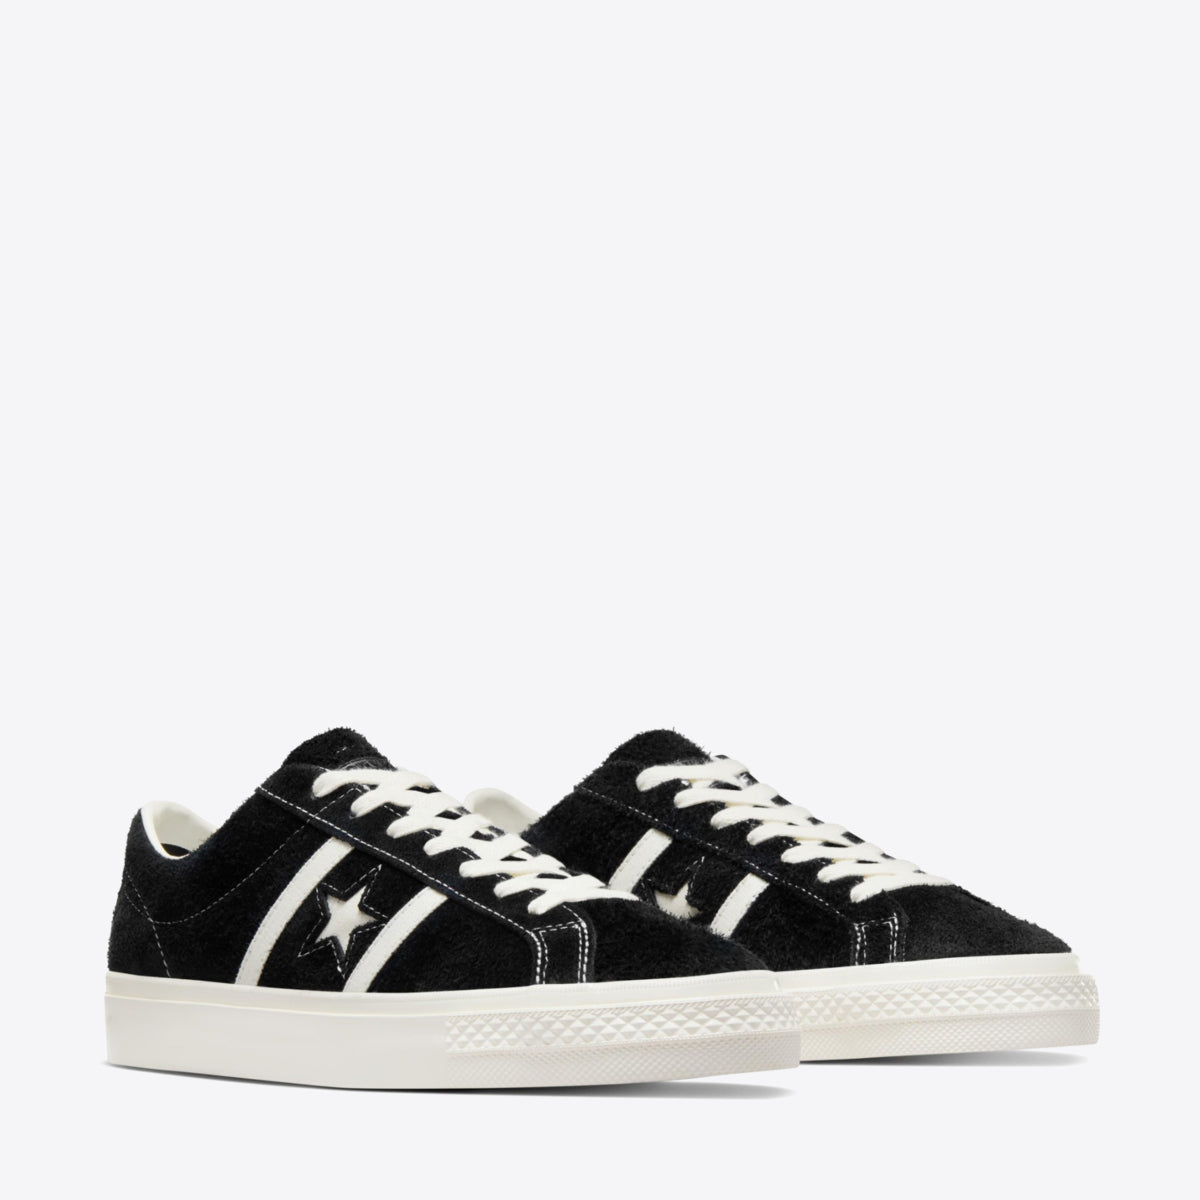 CONVERSE One Star Academy Pro Low Black/Egret - Image 5